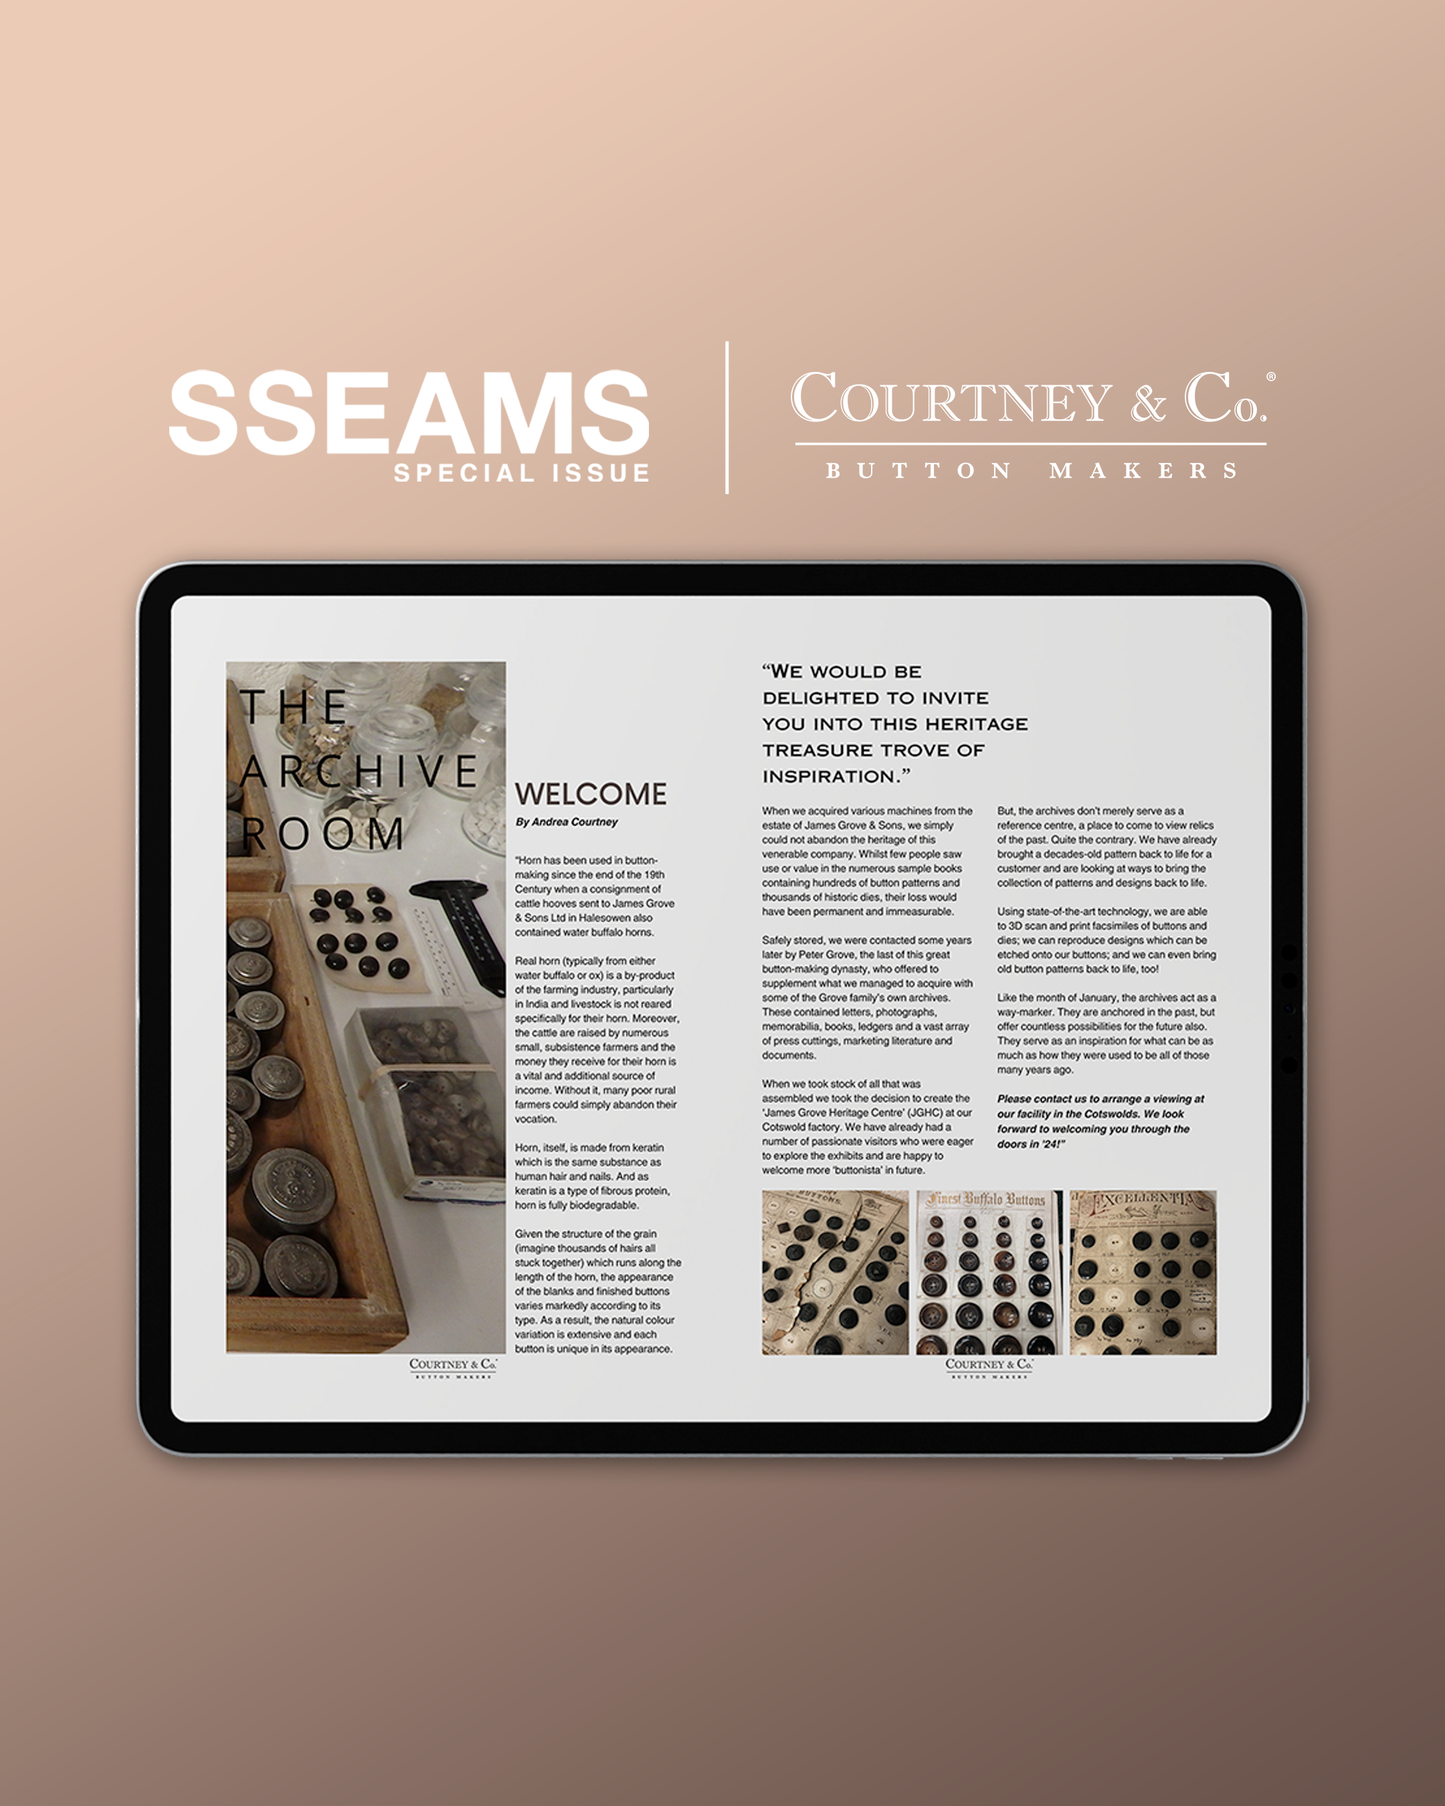 SSEAMS Special Issue - Courtney & Co.